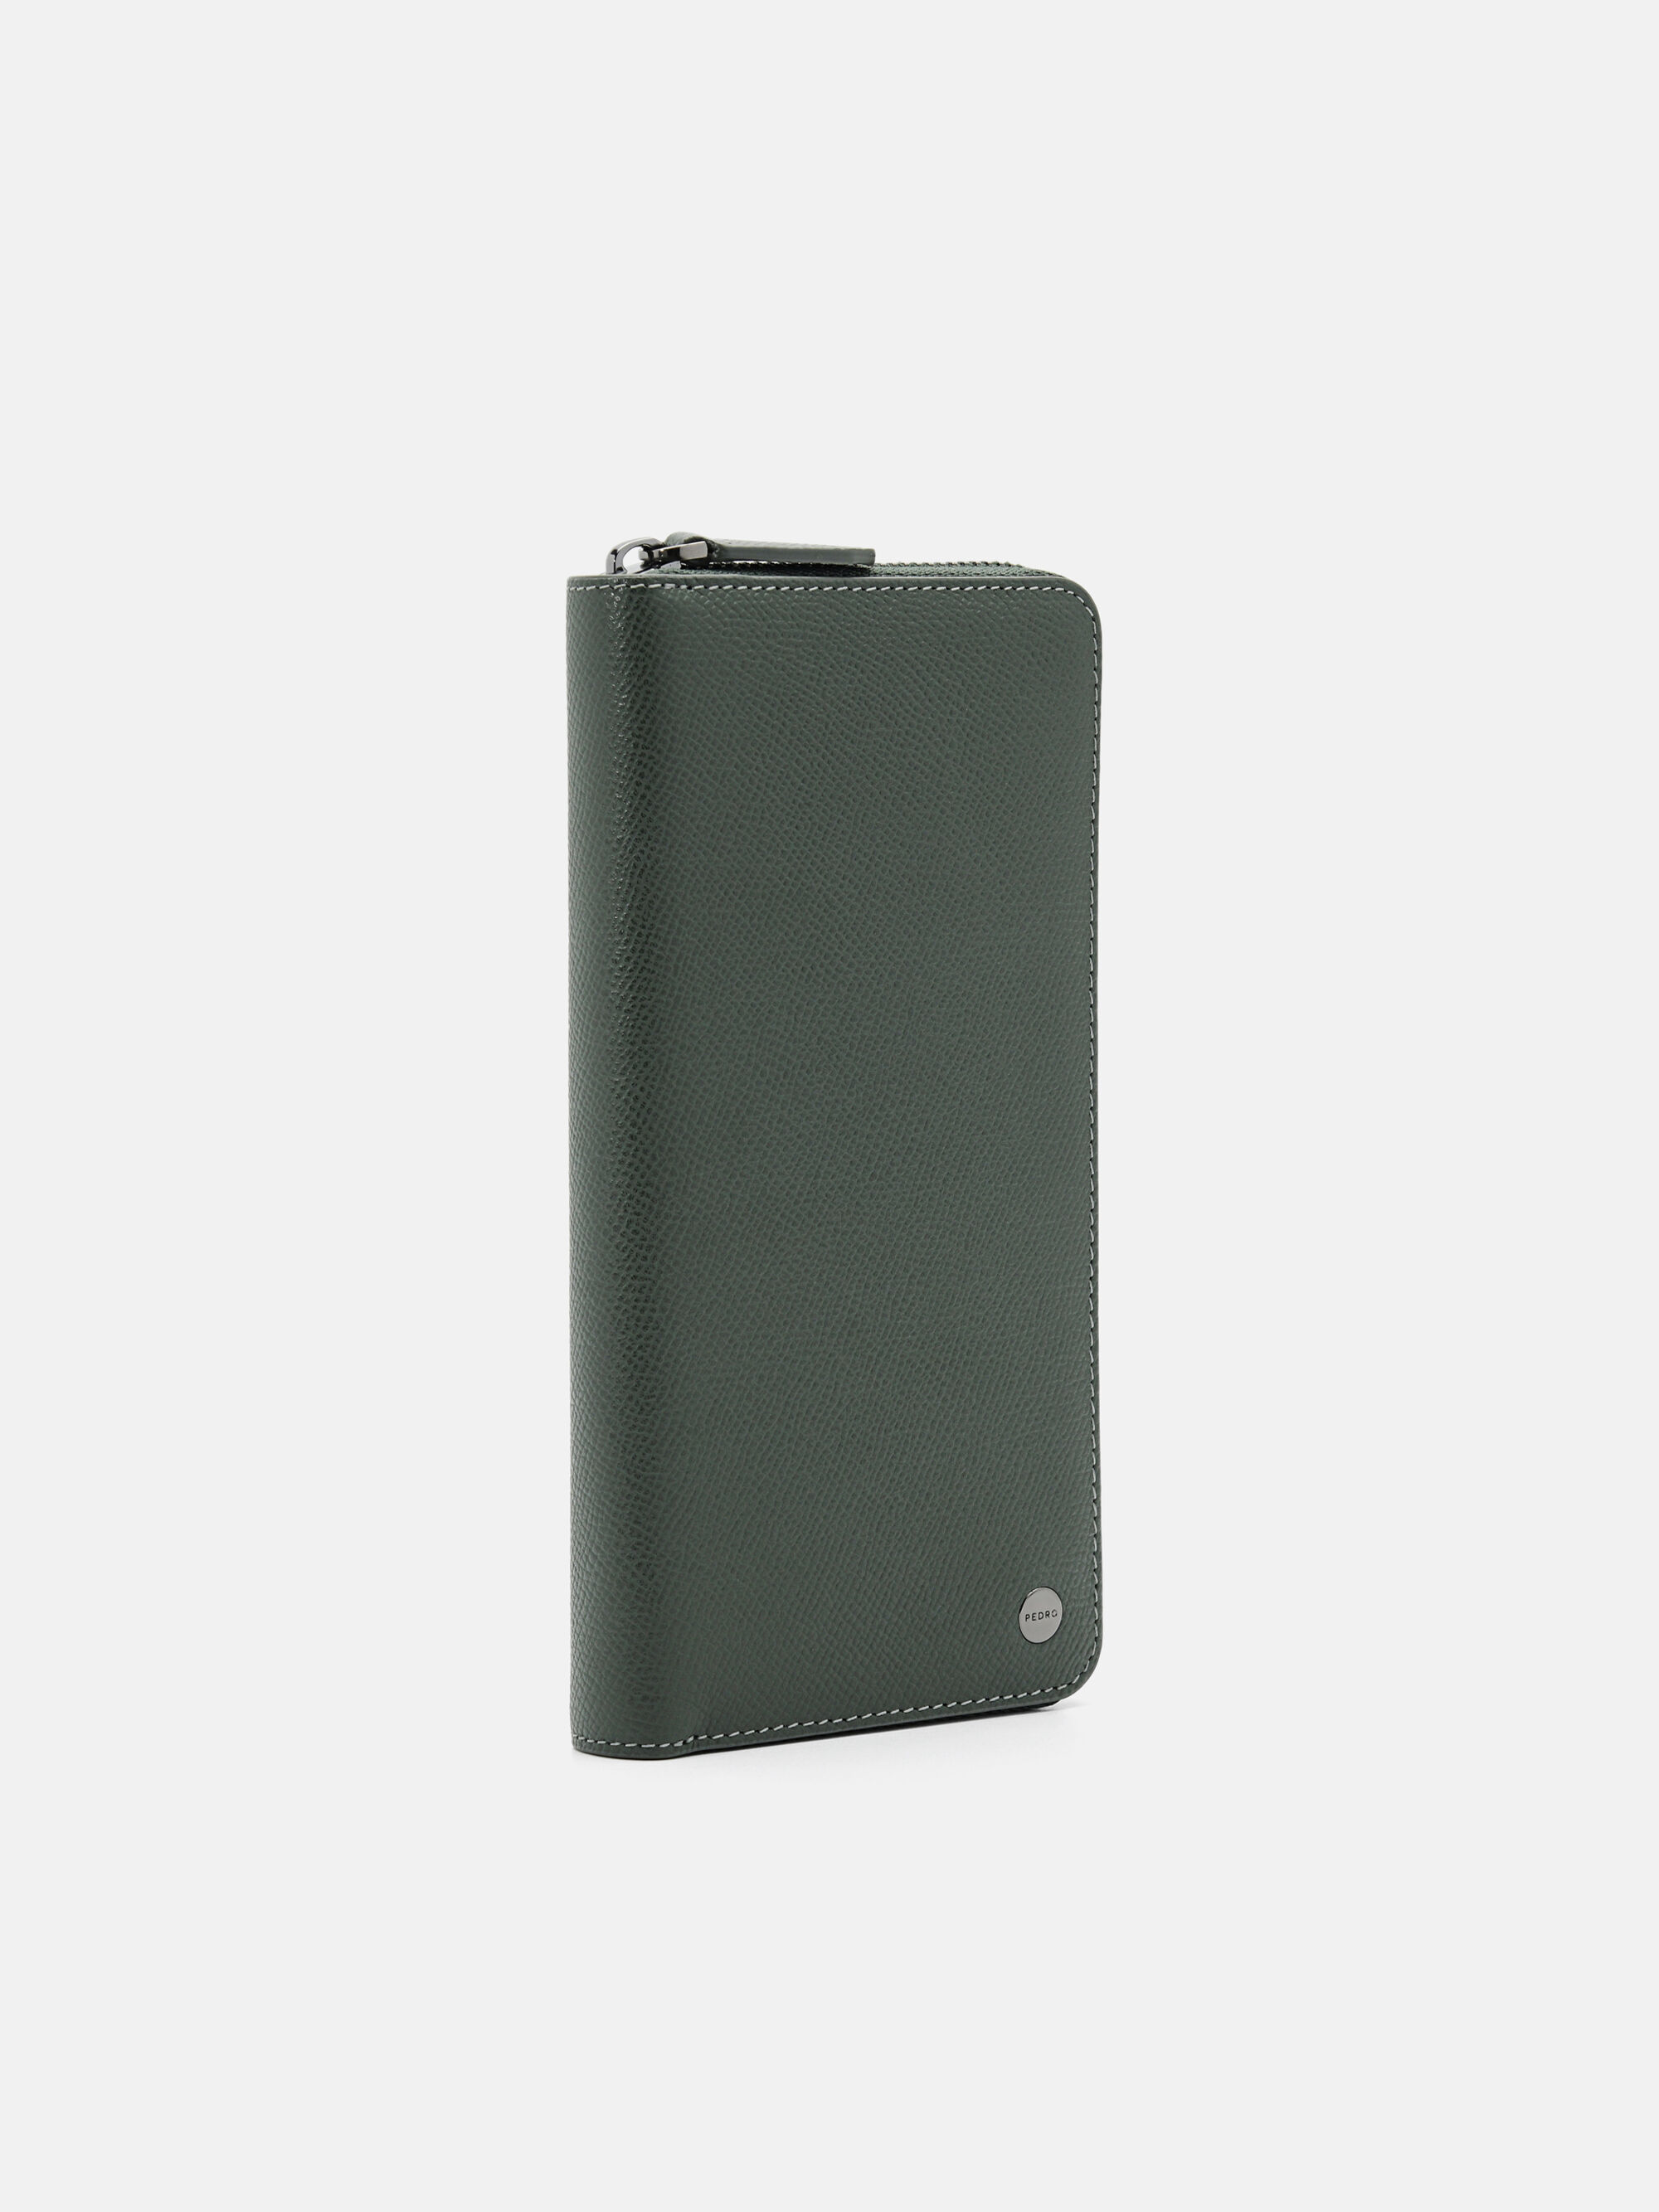 Oliver Leather Long Wallet, Military Green